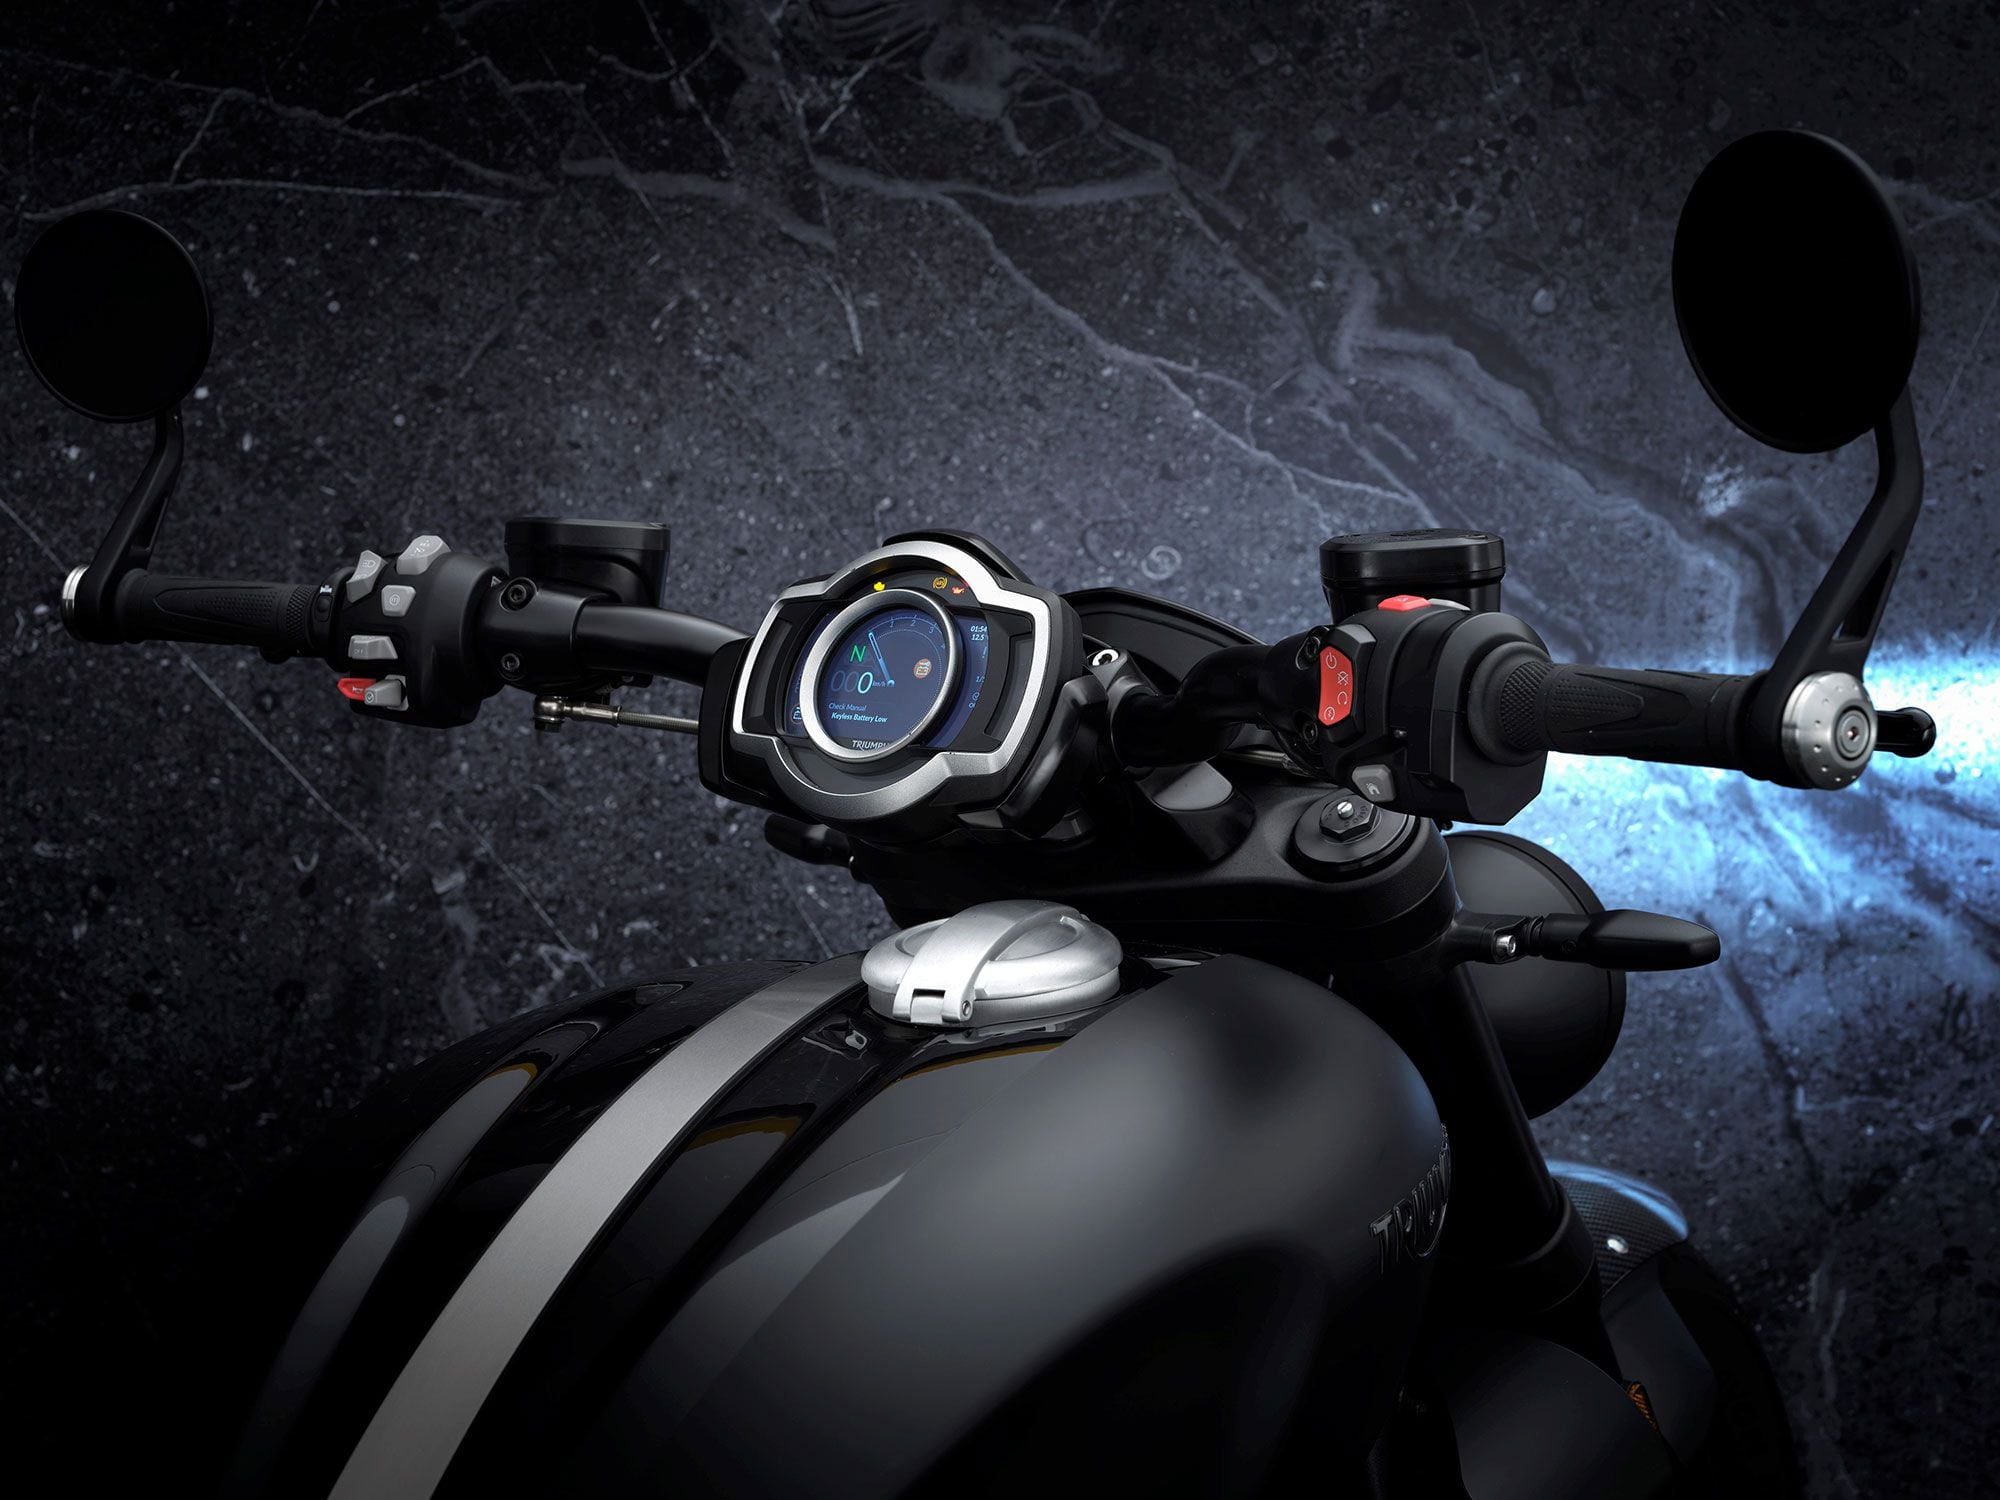 Four riding modes come standard, and the TFT dash can be configured for the My Triumph connectivity app. Shown is the Rocket 3 R Black cockpit.